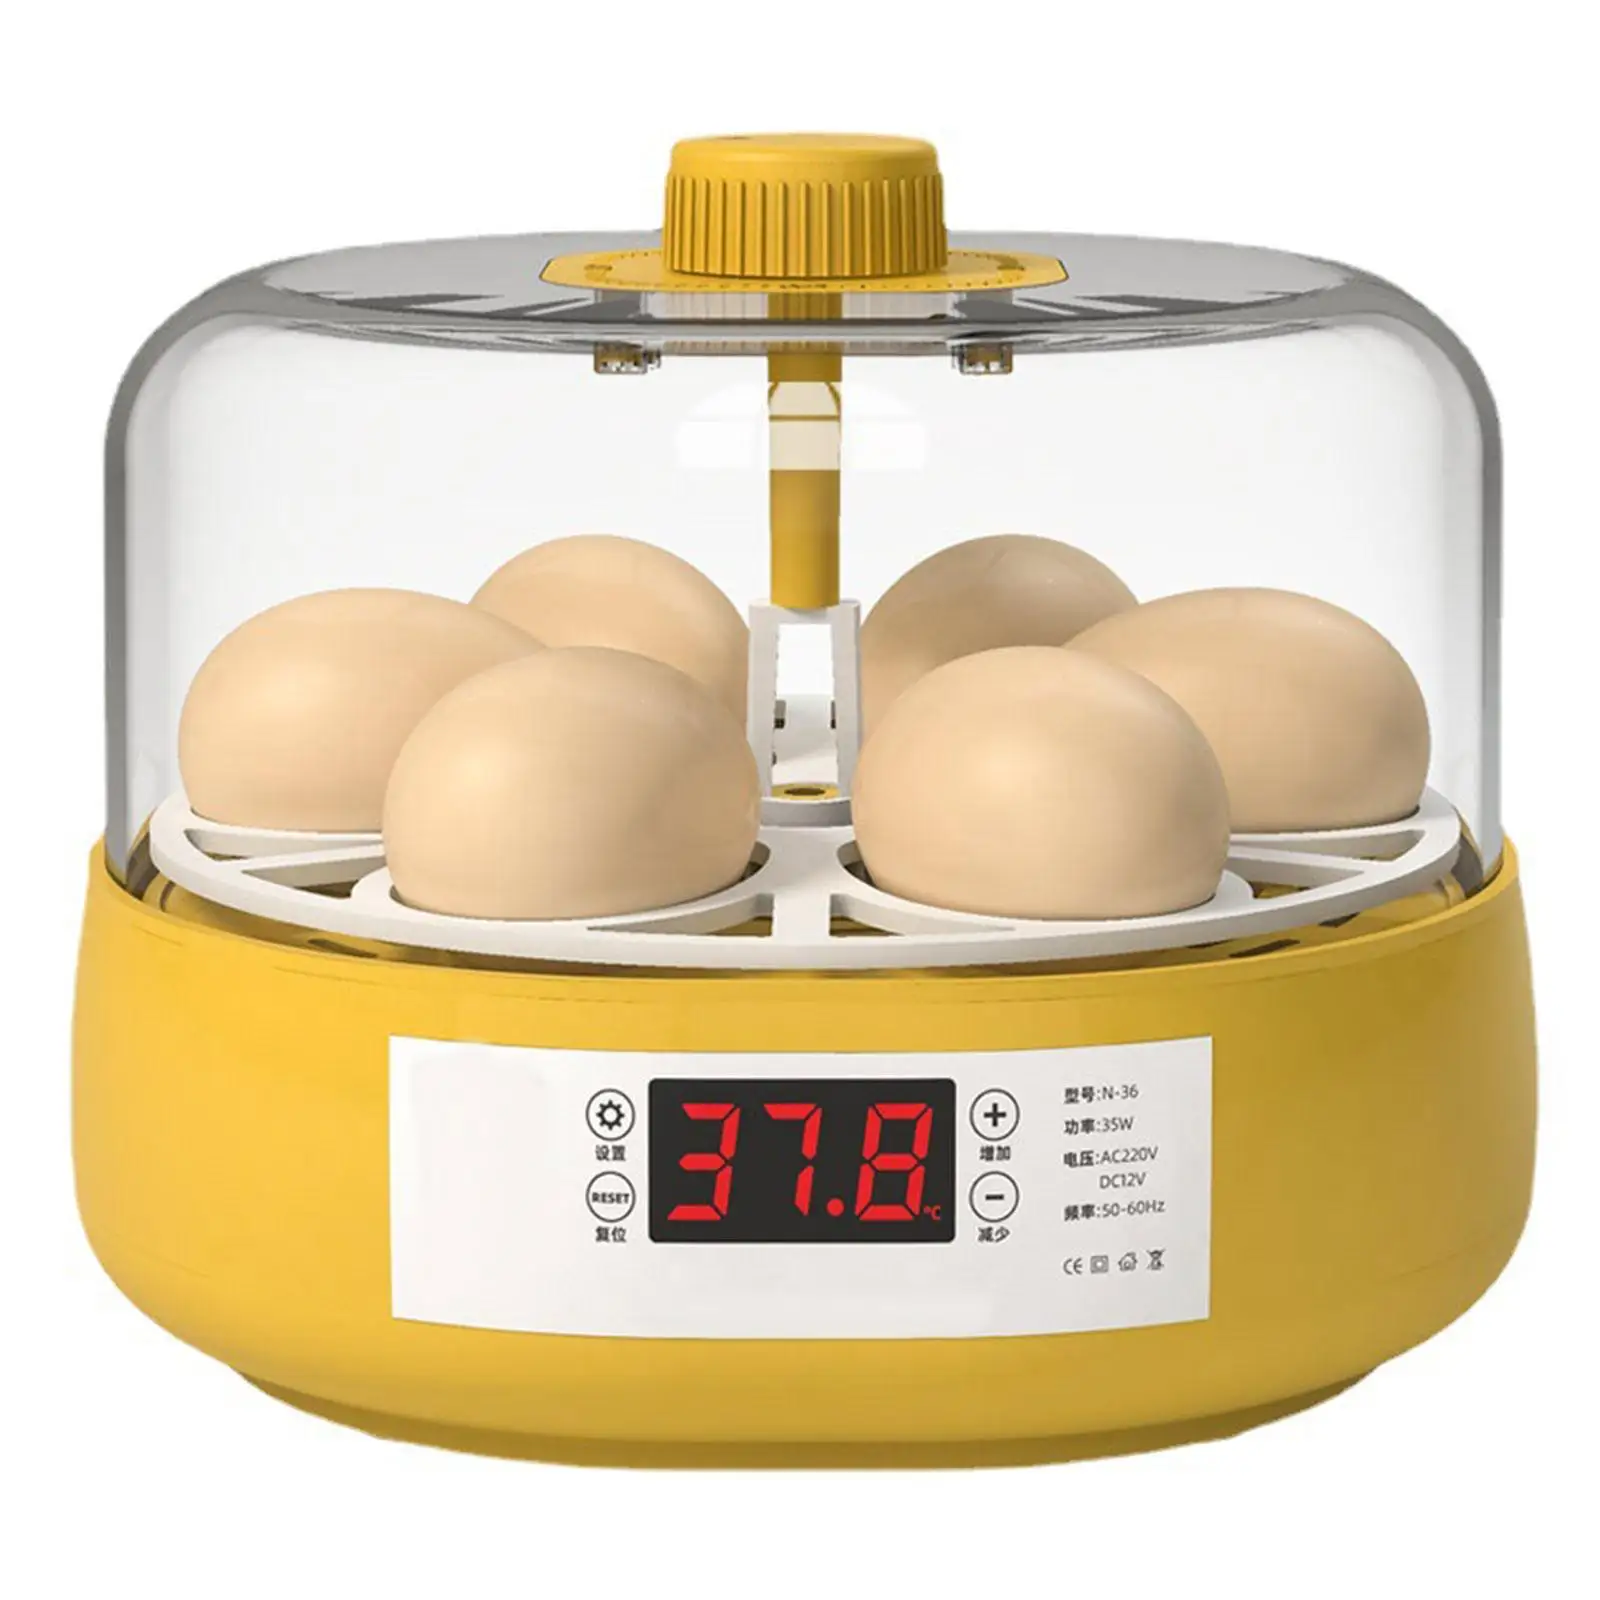 Egg Incubator Egg Turner Tray Egg Hatcher Machine Temperature Control Digital Poultry Hatching for Goose Duck Birds Chicken